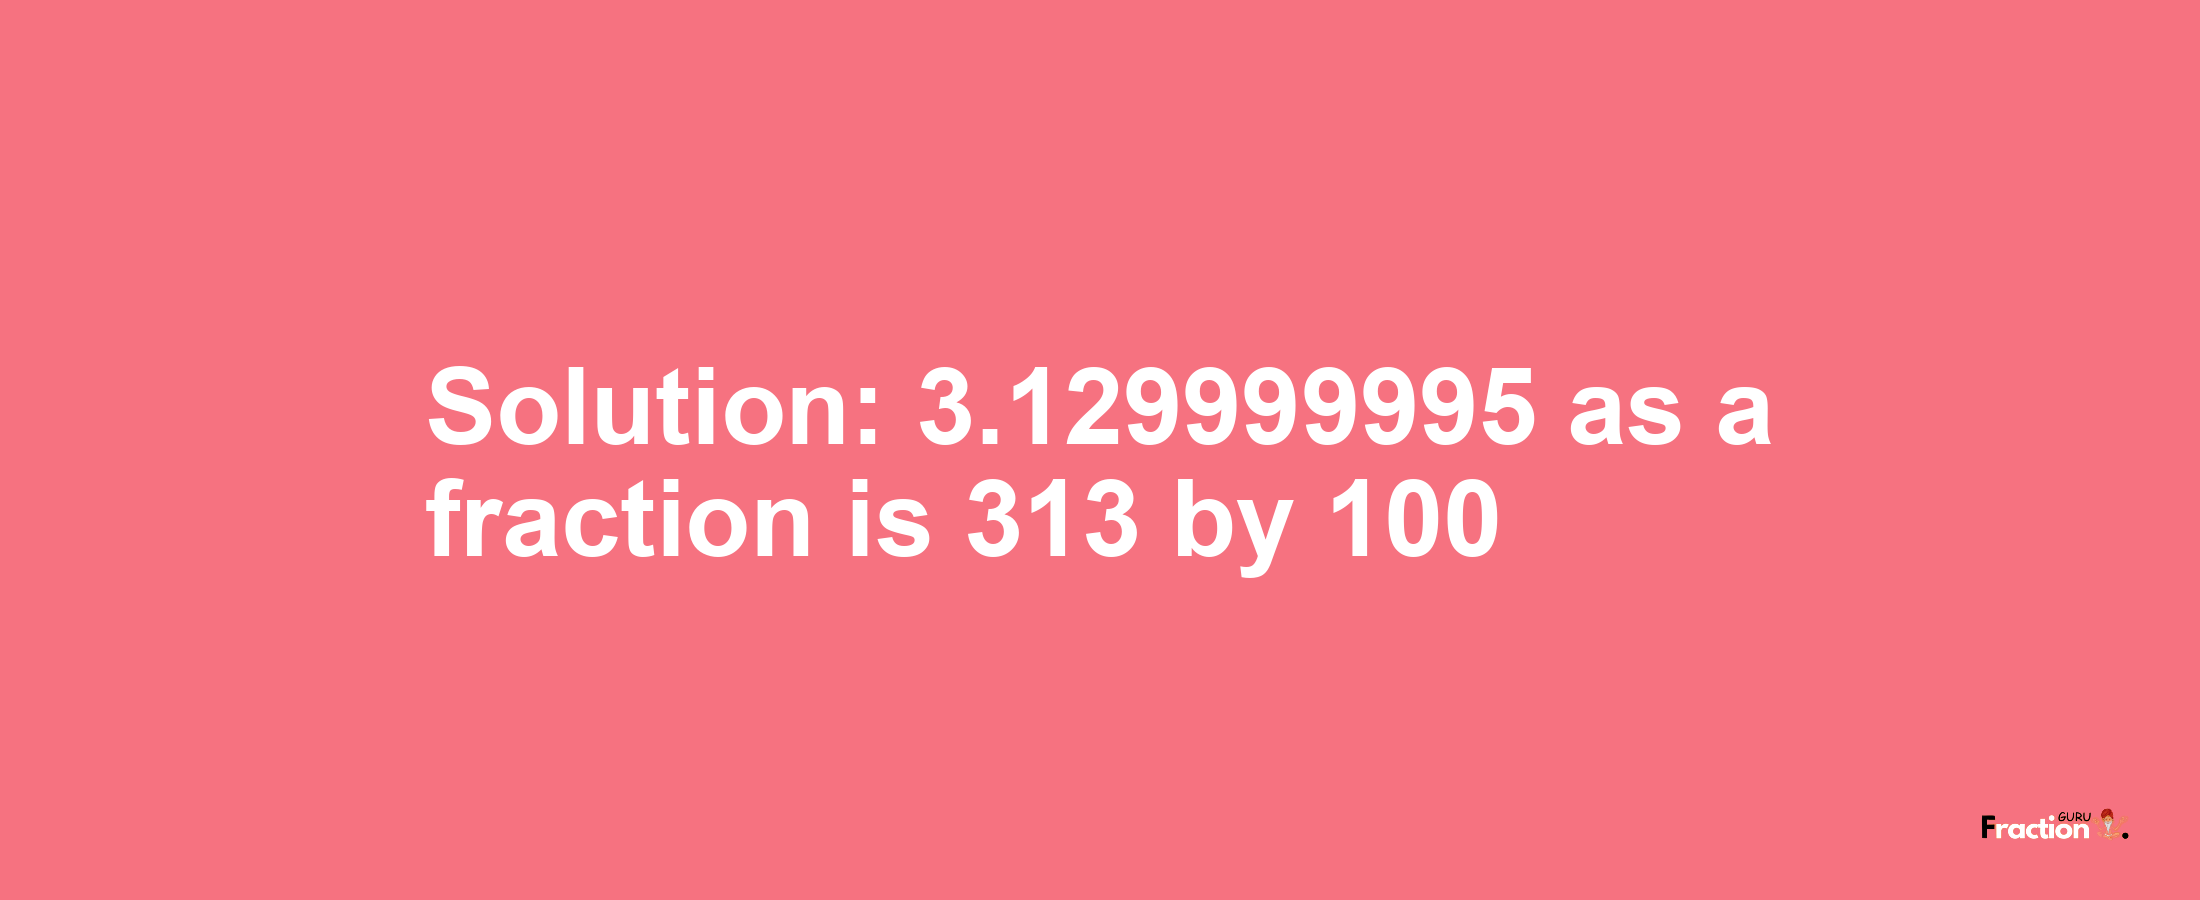 Solution:3.129999995 as a fraction is 313/100